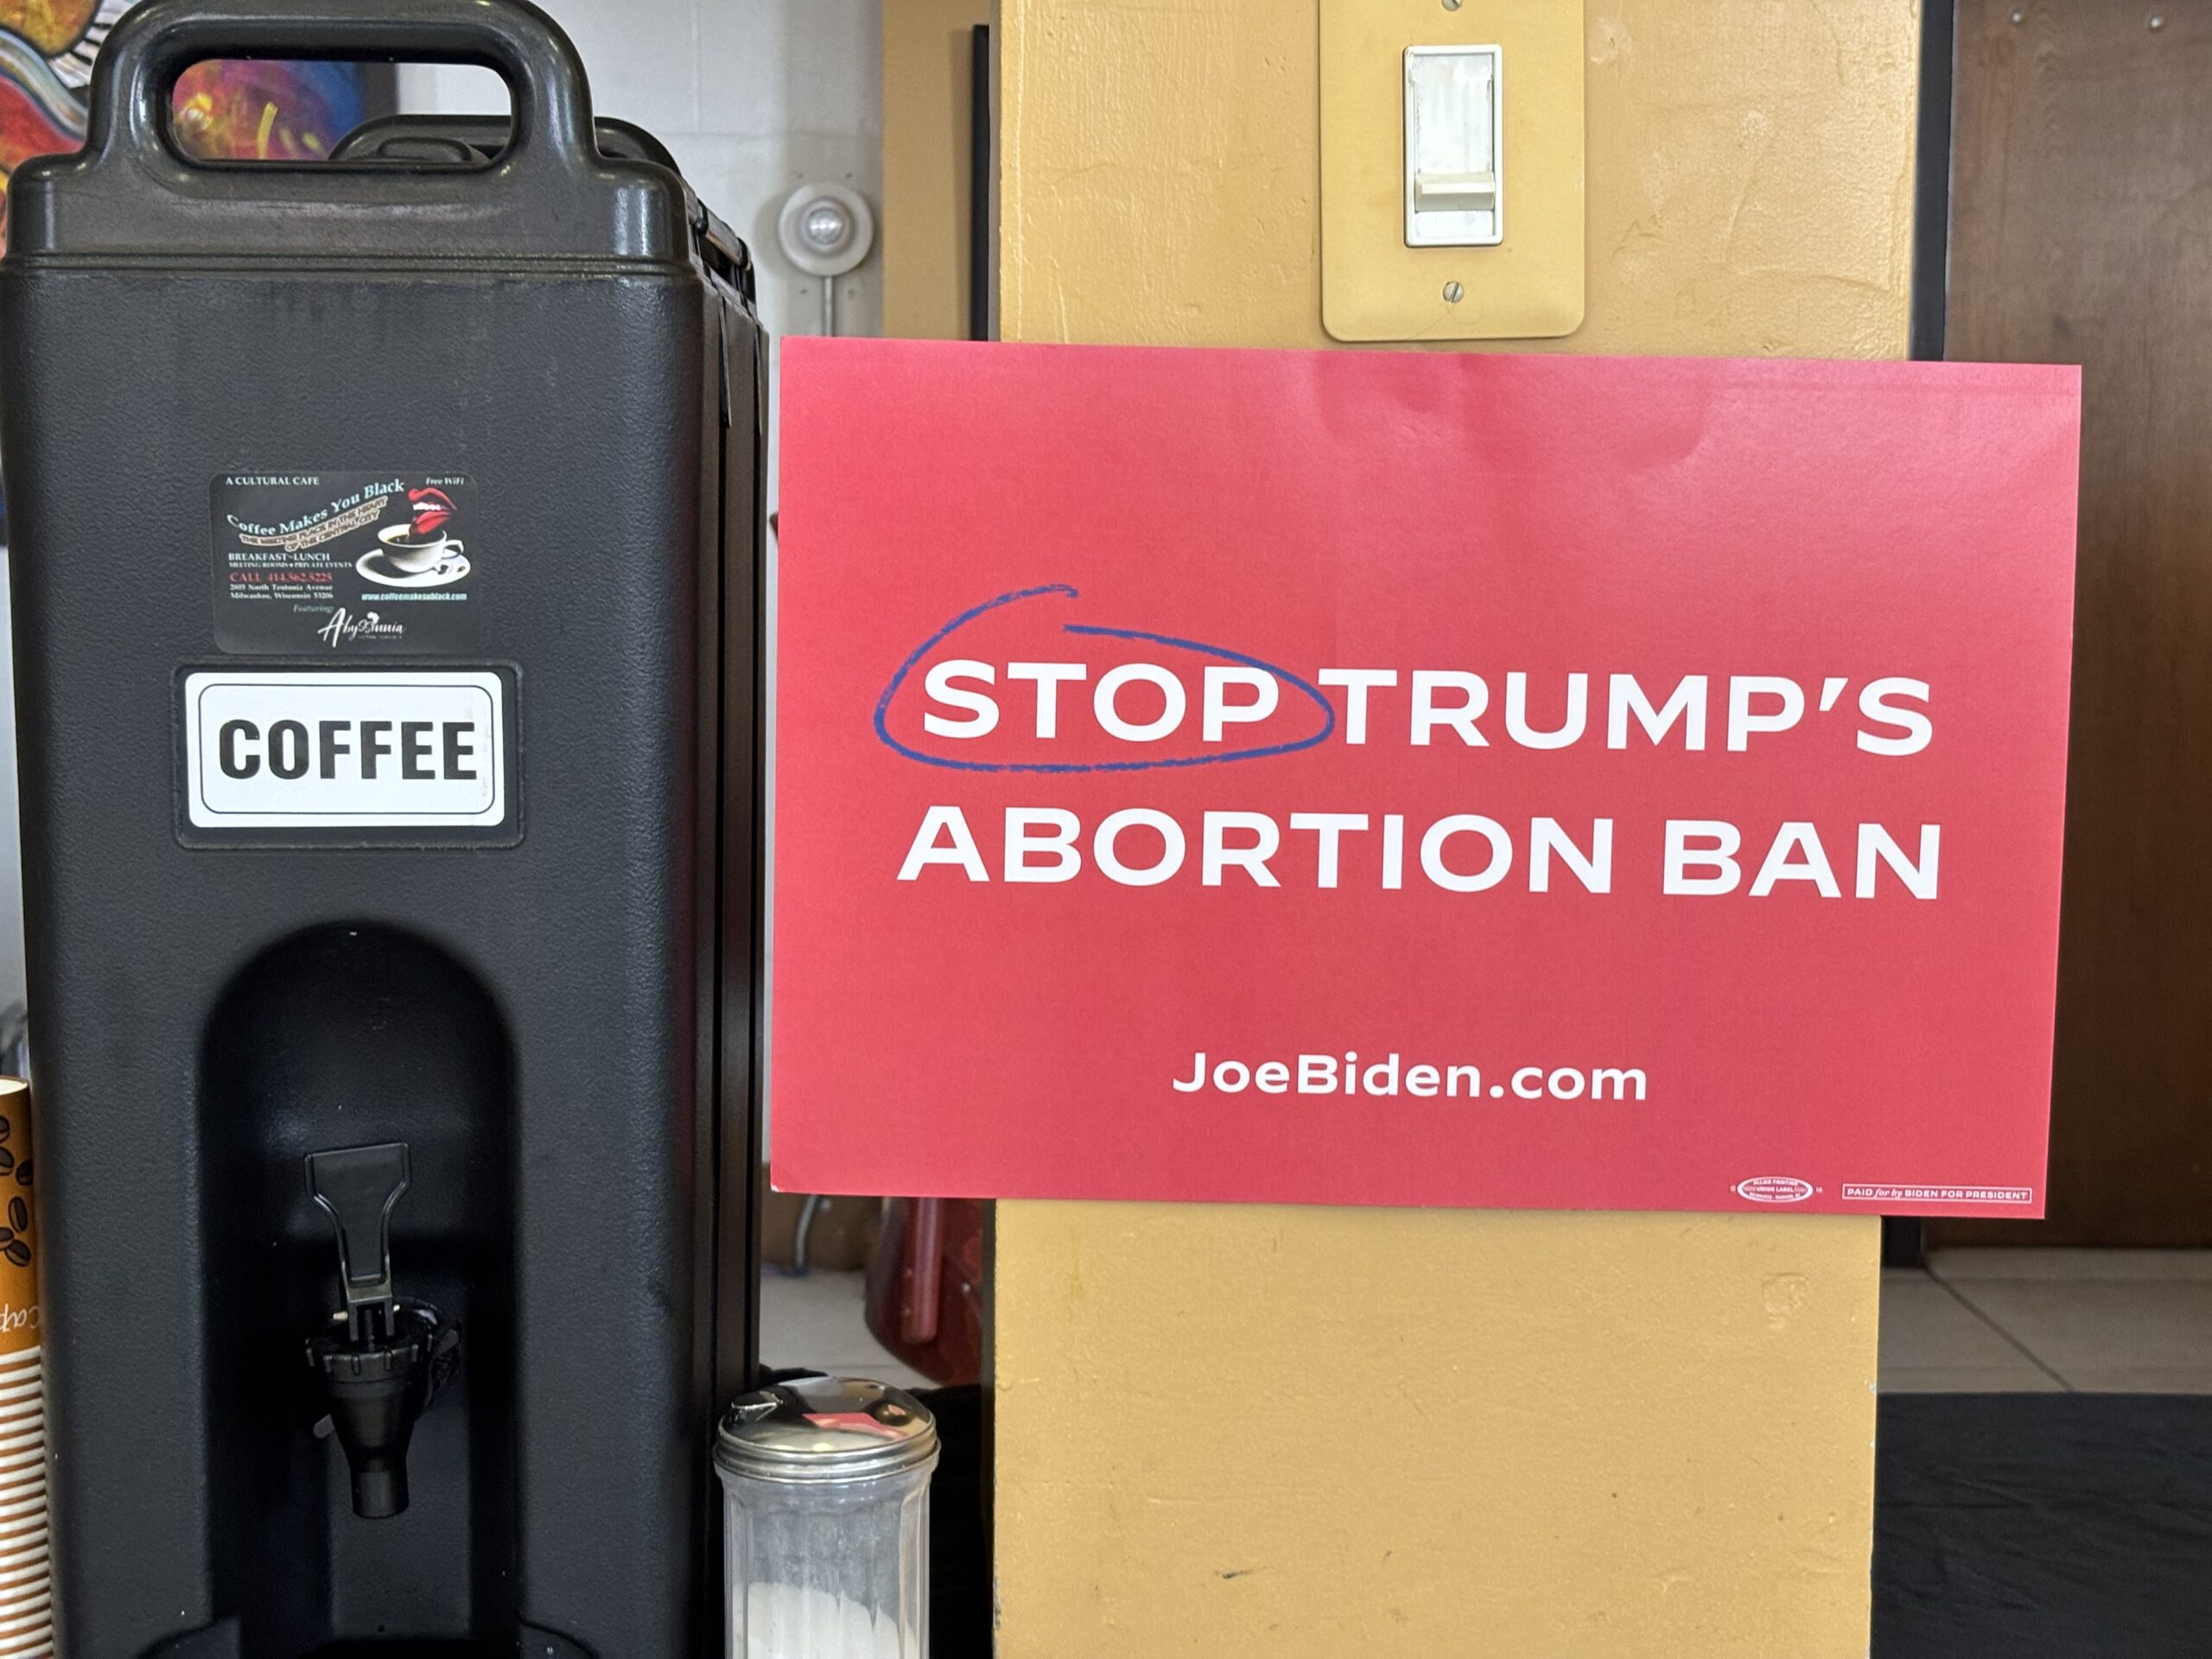 Biden campaign hosts roundtable criticizing Trump’s stance on abortion